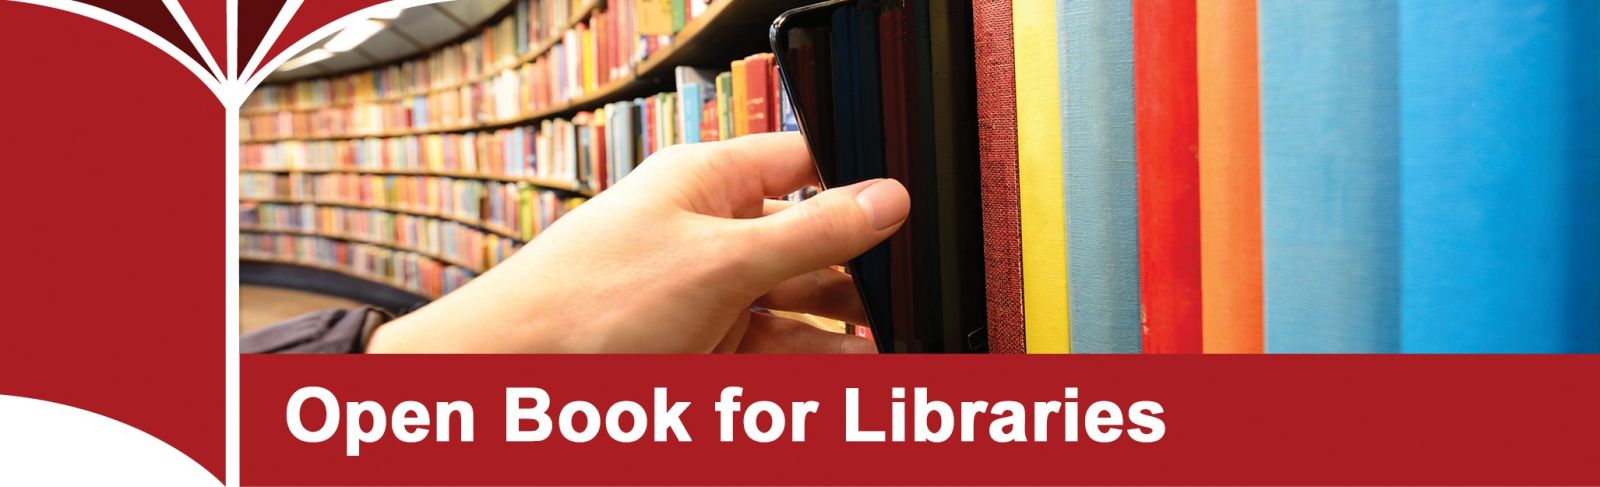 Open book for libraries